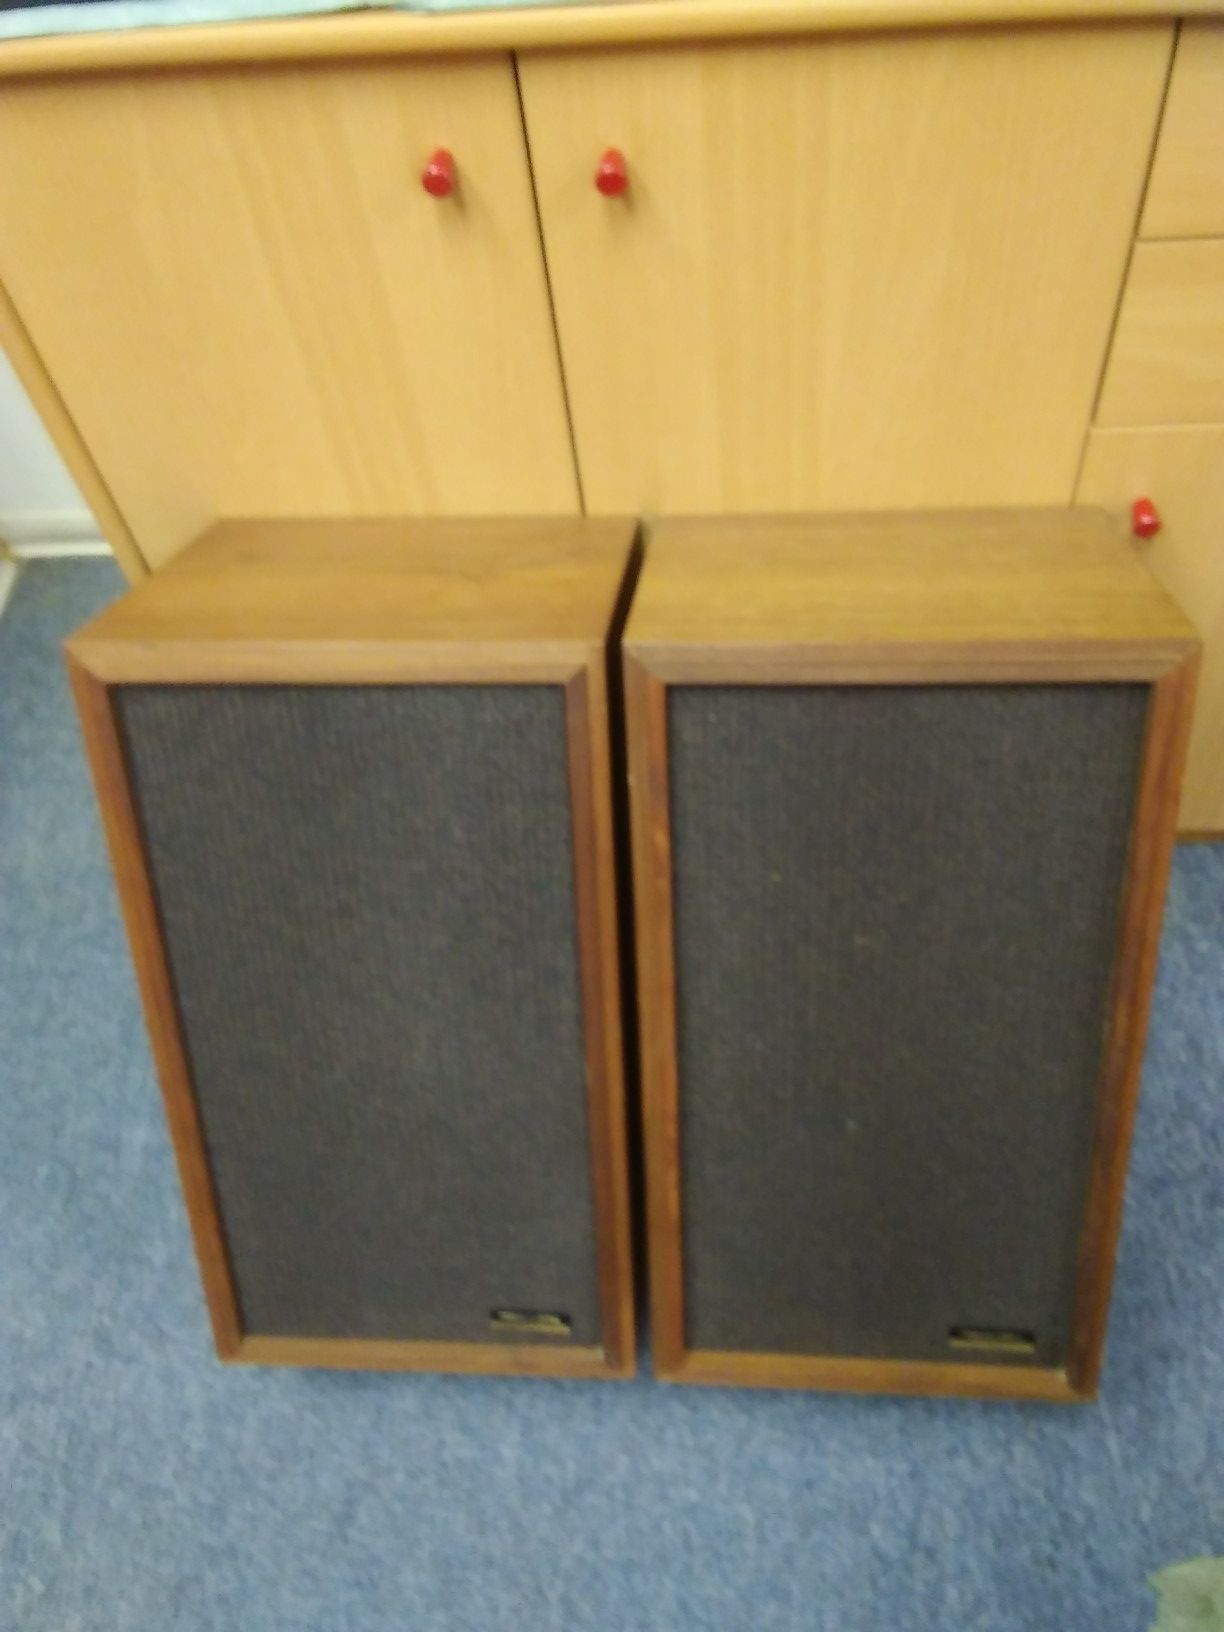 Classic audio speaker pair. 2 oiled walnut enclosures each with 8 inch woofer and 4 inch tweeter. Case size 20x11x9.5 Excellent working condition.